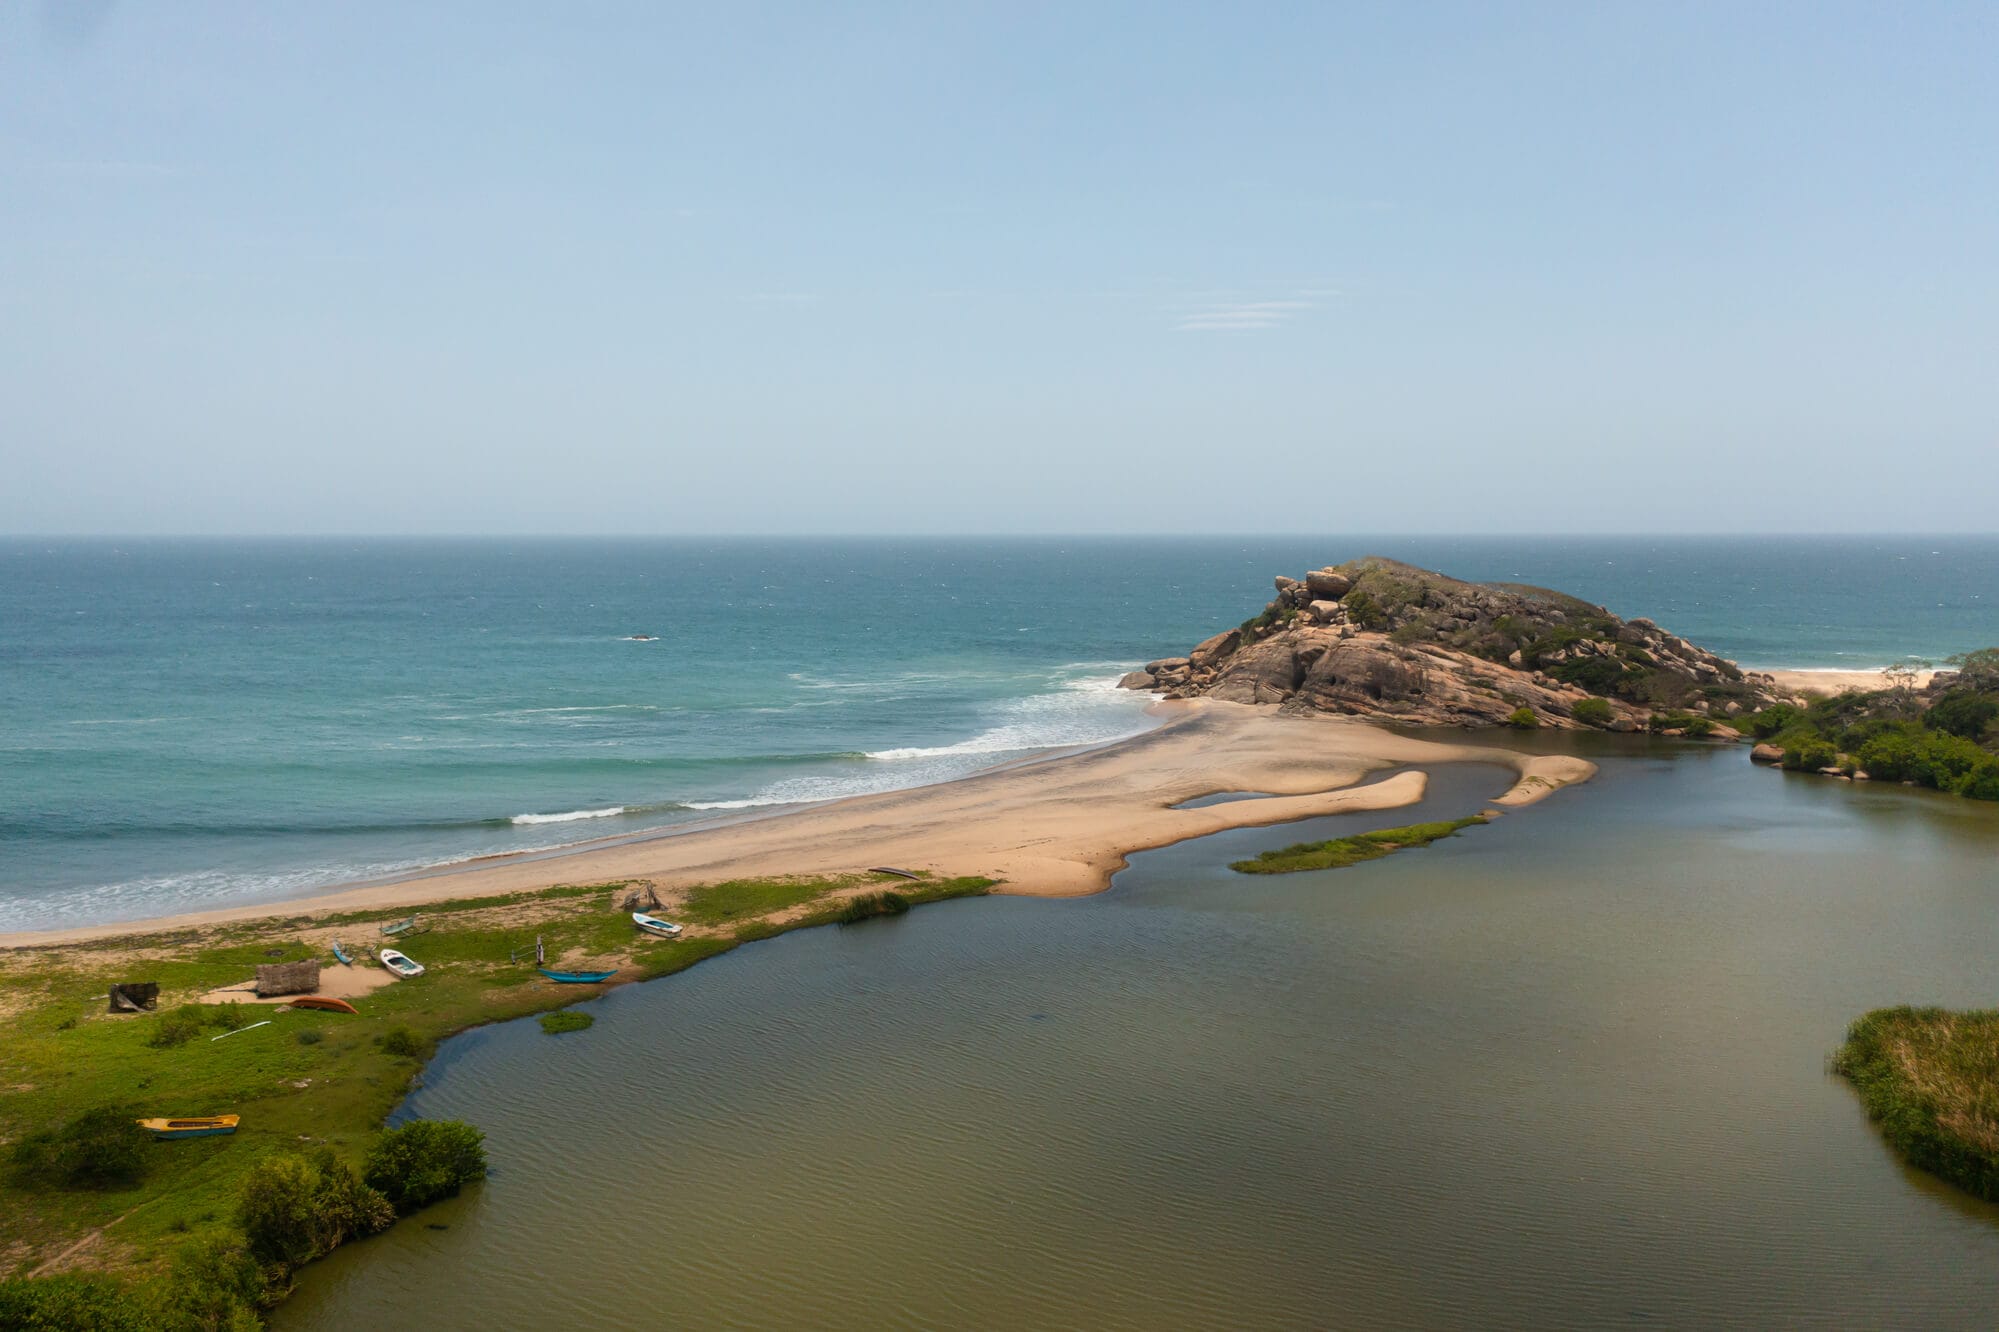 View of the ocean and a lagoon divided by a narrow sandy beach with an outcrop on one side, called Elephant Rock. One of the top things to do in Arugam Bay Sri Lanka.